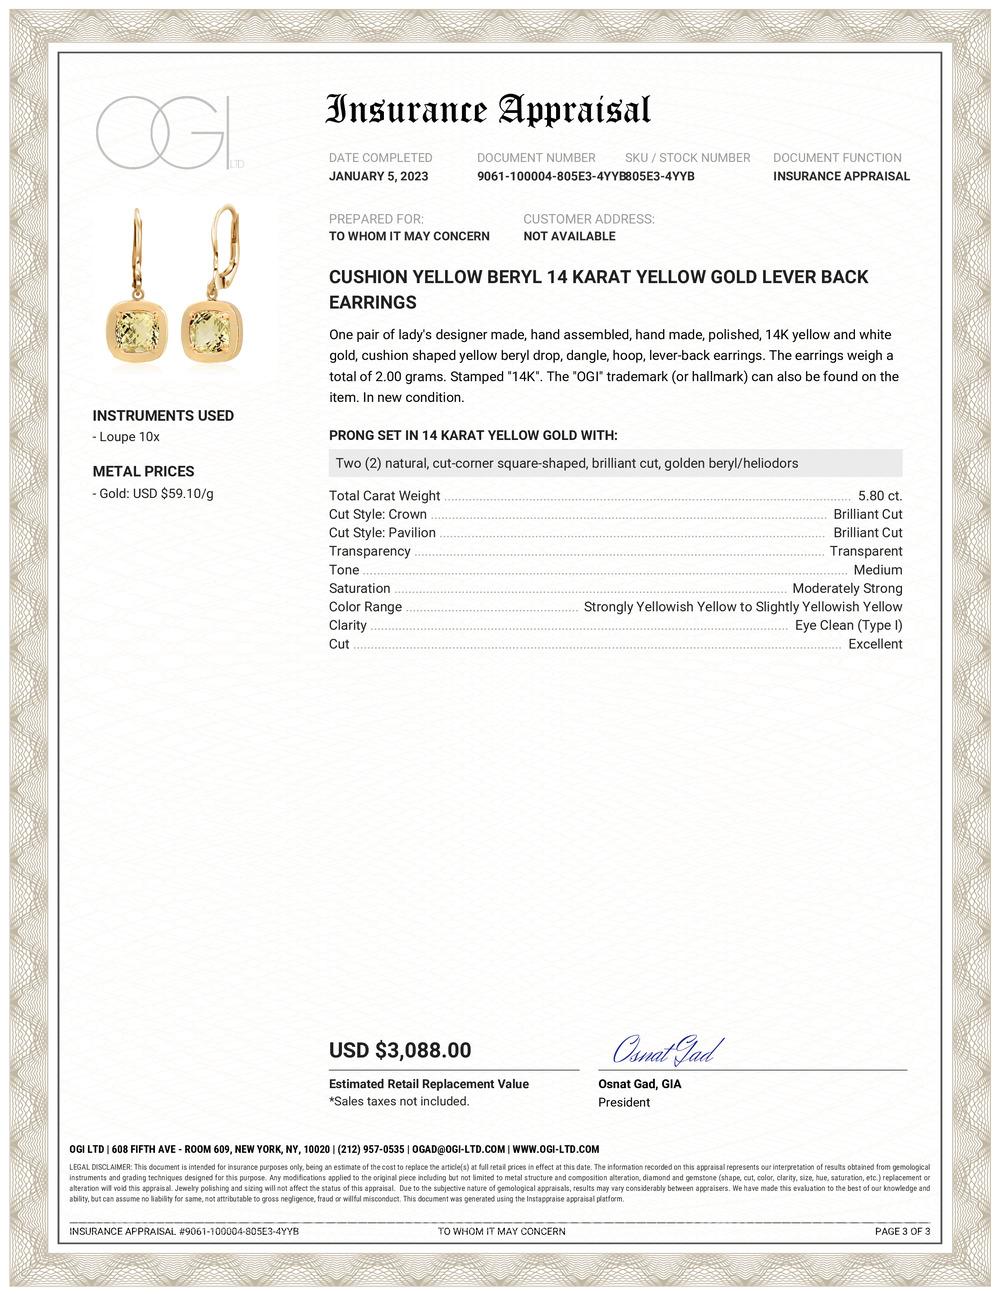 Fourteen karat drop yellow gold hoop lever back earrings
Two cushion-shaped yellow beryl, bezel set, weighing 5.80 carats
Golden beryl is found in Brazil and Madagascar.
Yellow beryl are fine gems with an intense banana-peel yellow color
Earrings